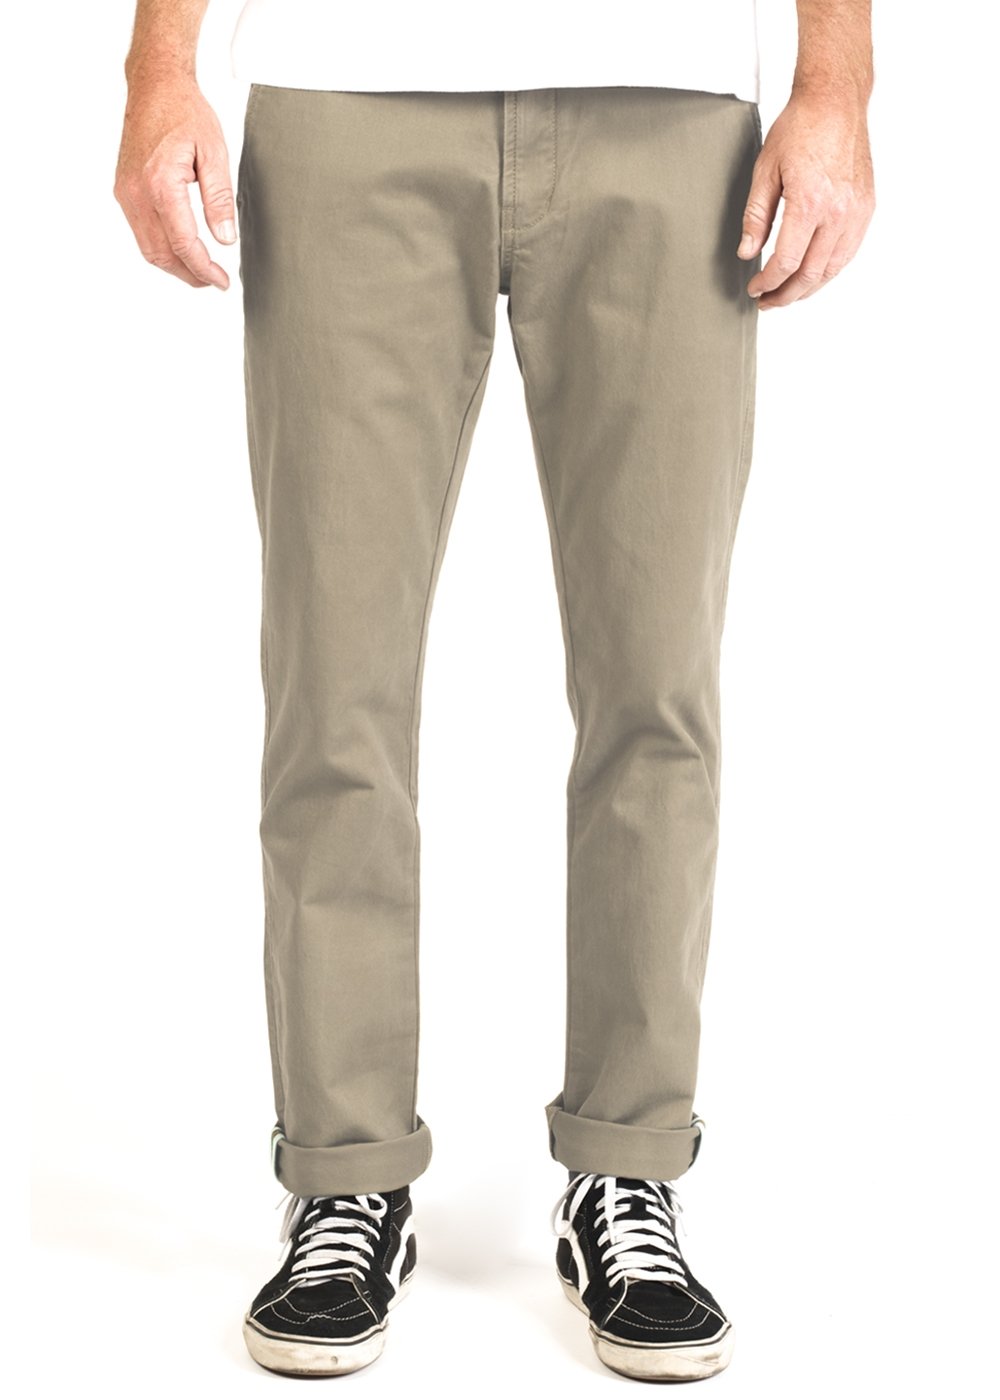 Low Tide Chino Eco Pant.